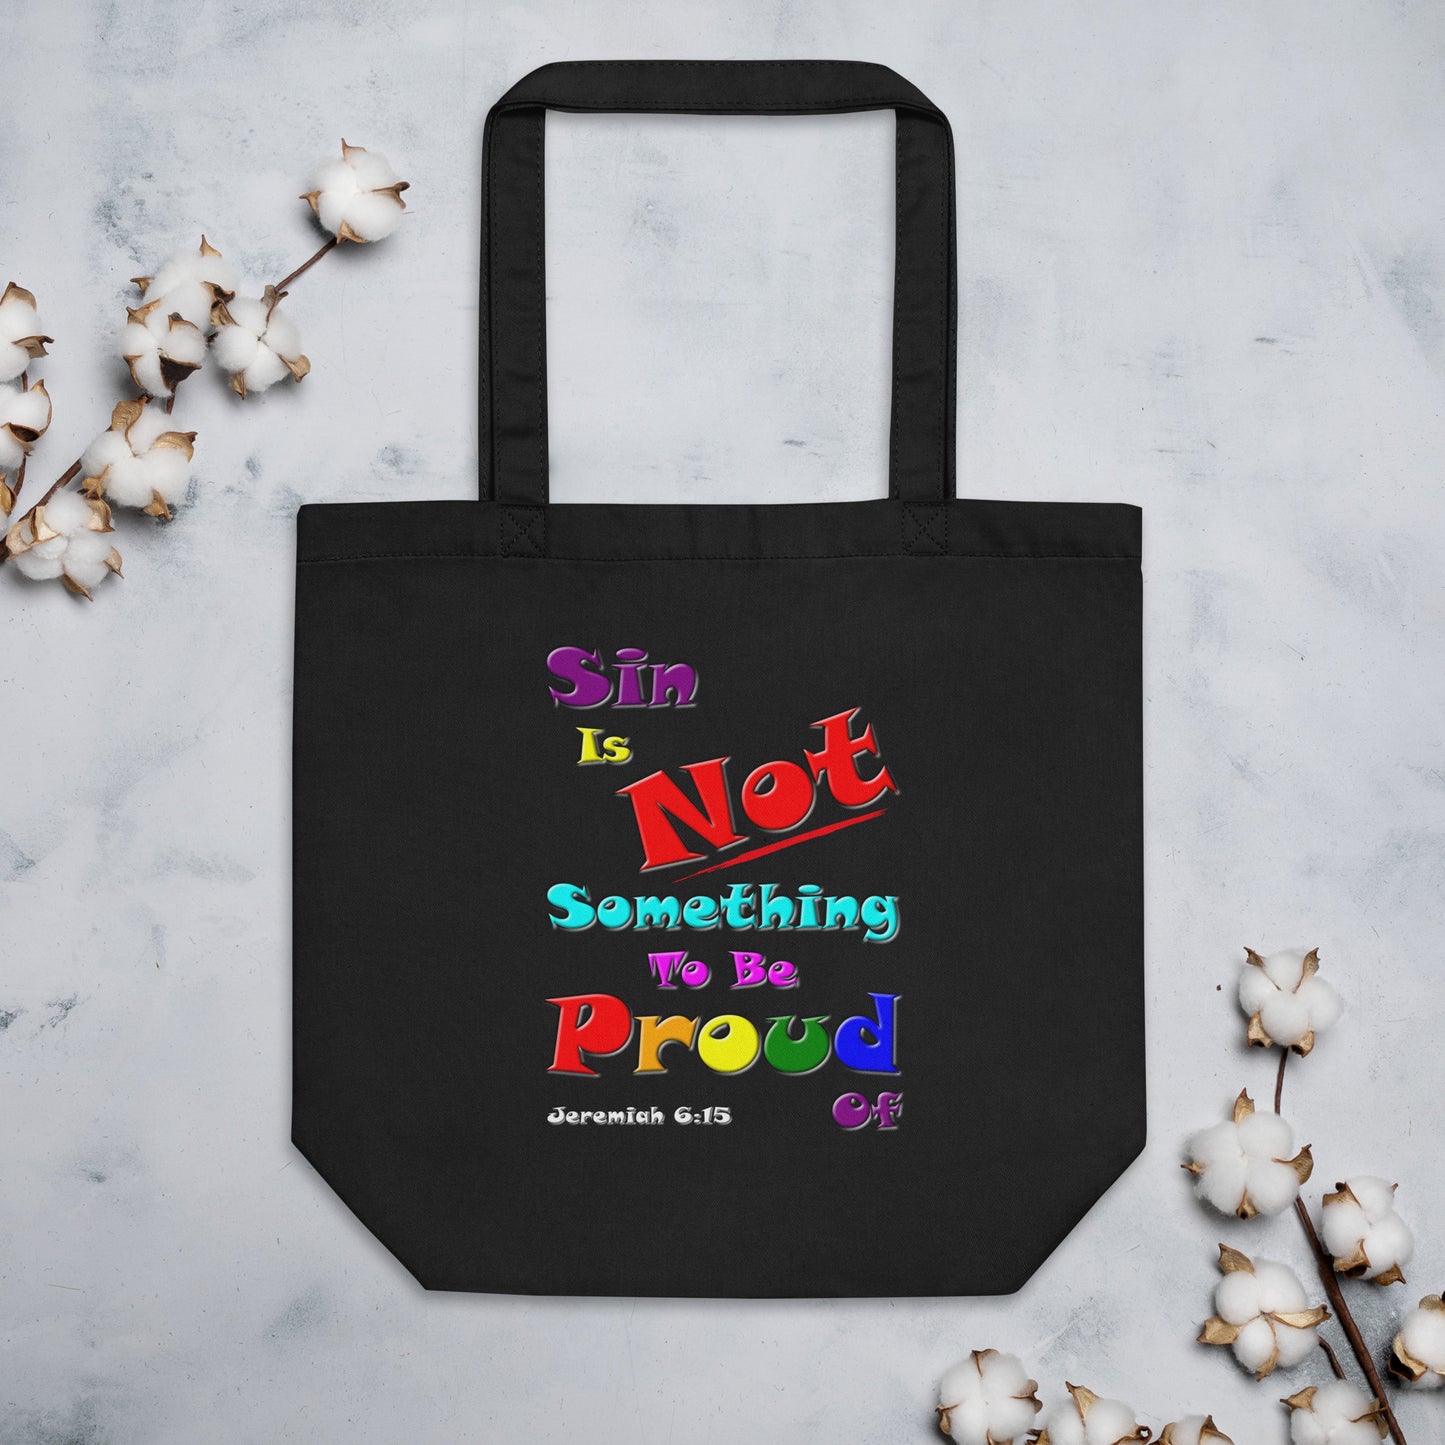 A018 Tote – Eco Tote Bag Featuring Jeremiah 6 15 with the colorful Text “Sin Is Not Something To Be Proud Of.”